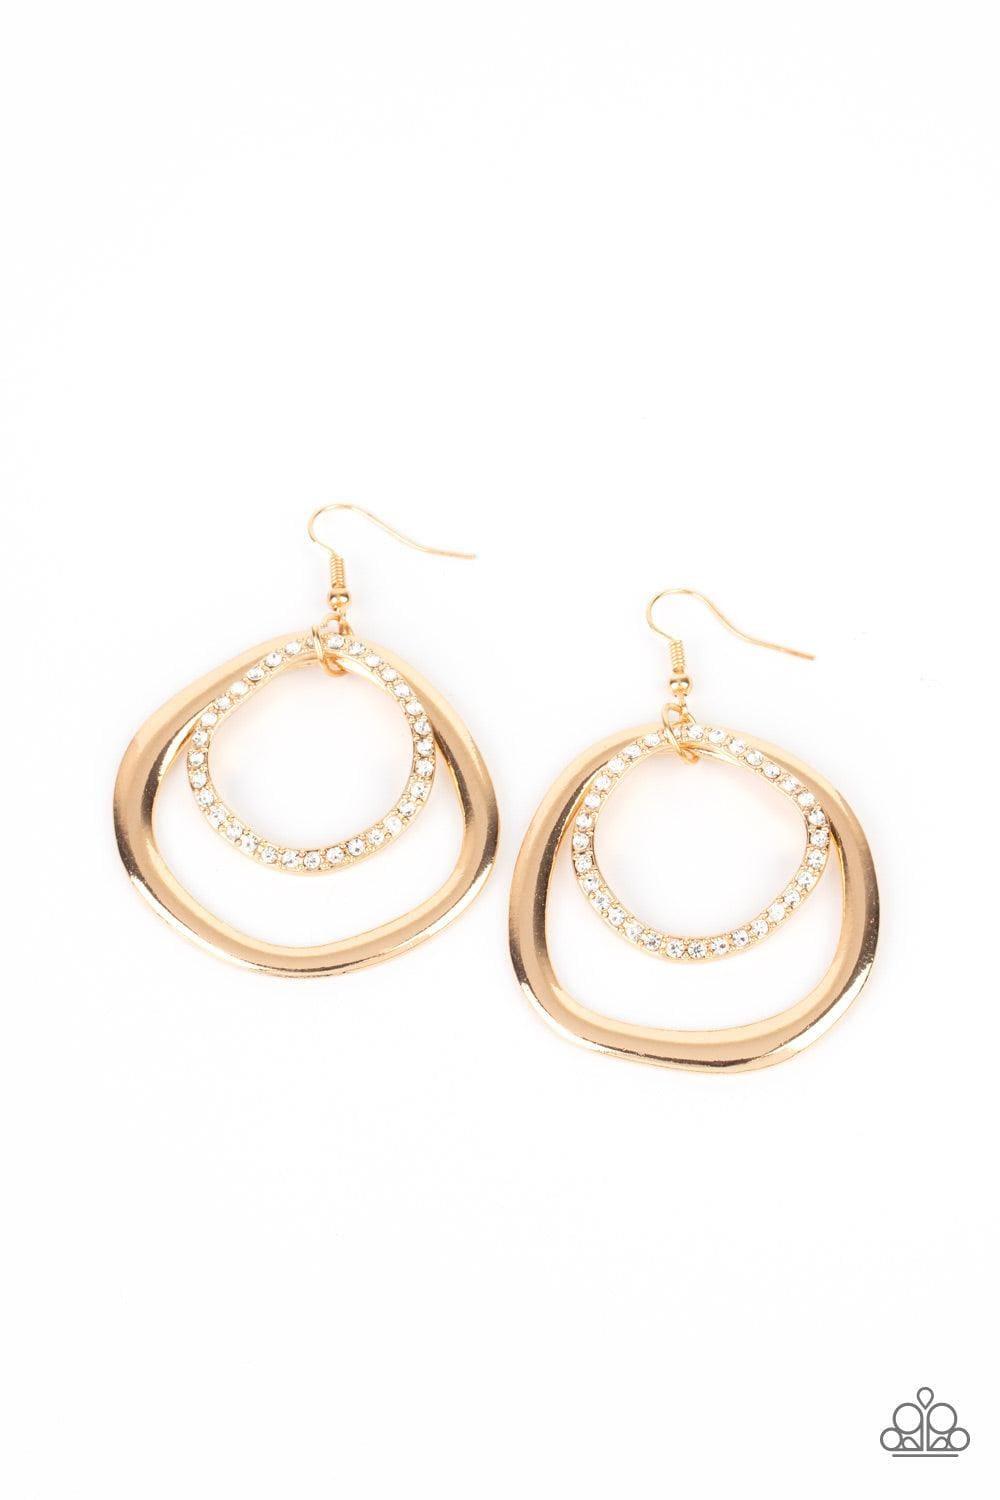 Paparazzi Accessories - Spinning With Sass - Gold Earrings - Bling by JessieK